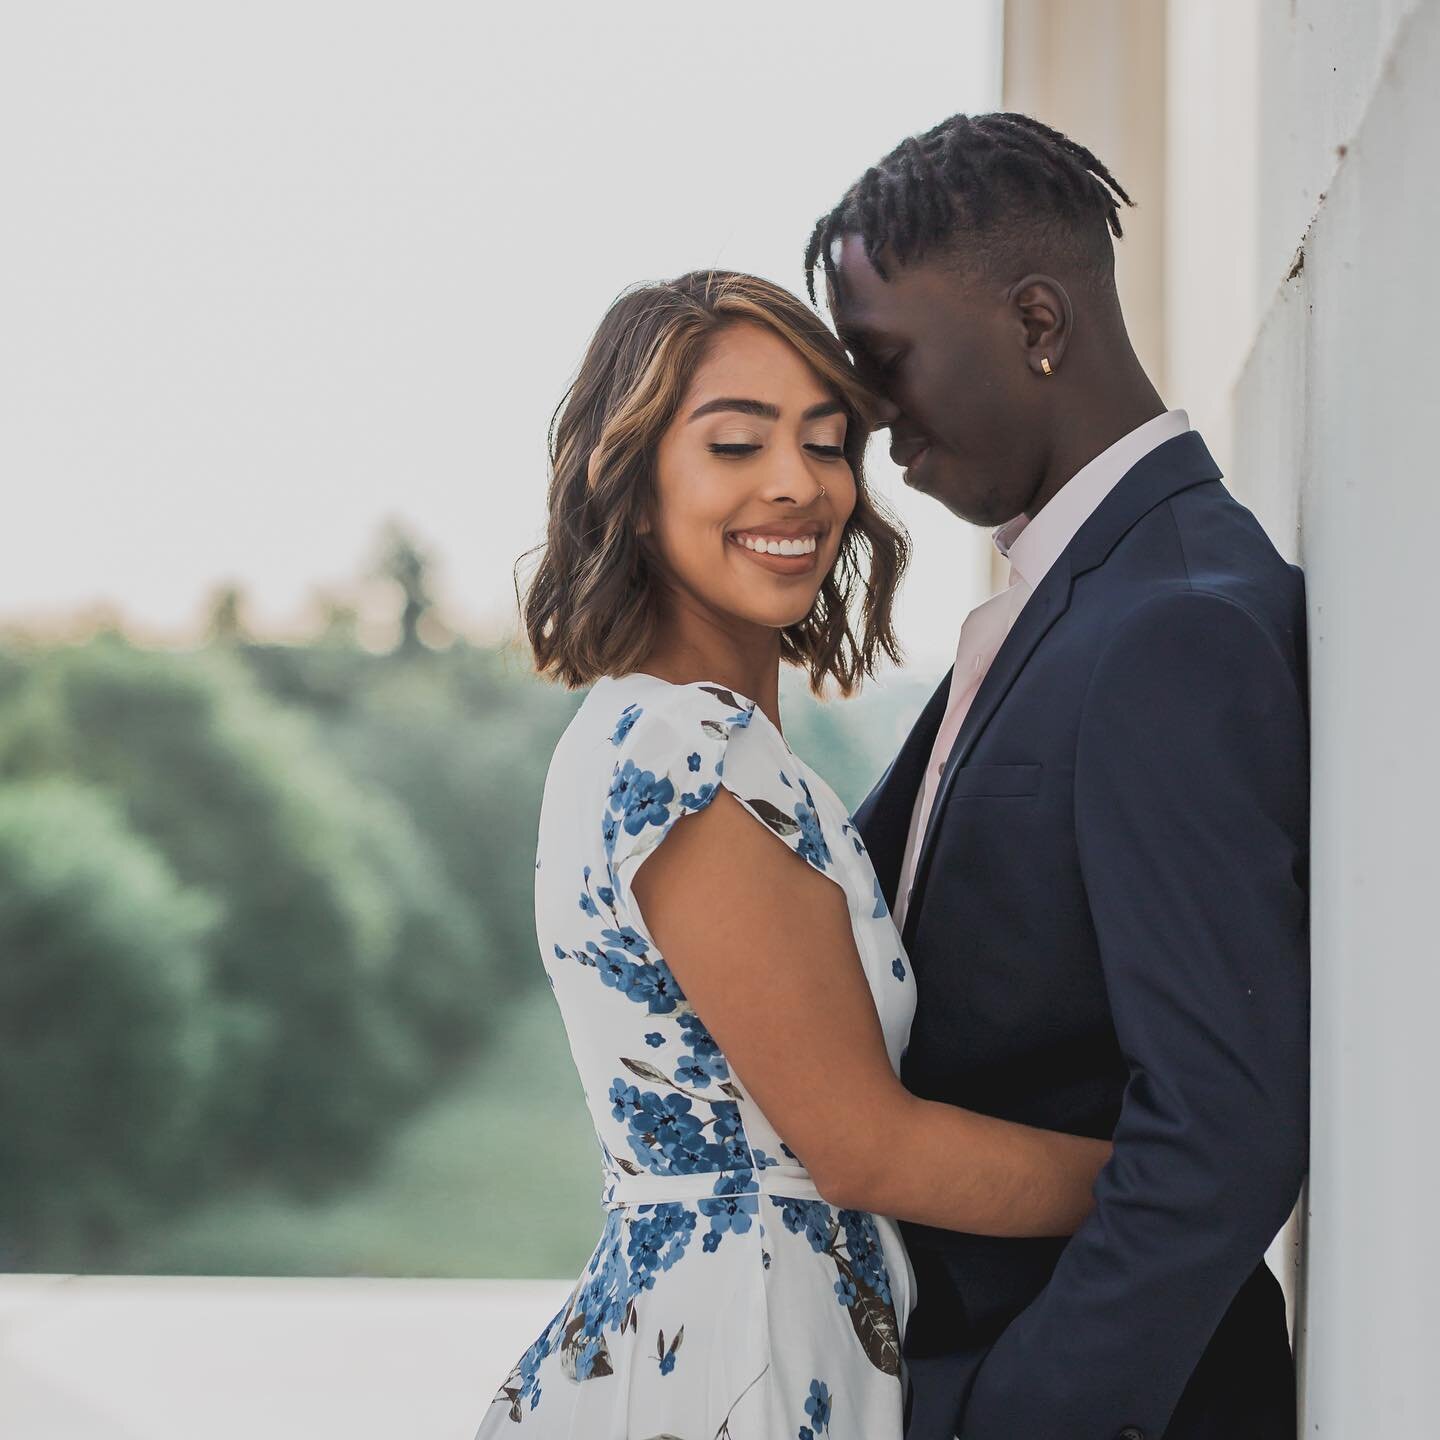 Are you kidding me?! These engagement photos are really giving romance and elegance 🤩 do we want details on the makeup look? 
.
.
Makeup by me 
Photos by @lailachanel_studios 
#engagementphotos #engagement #dcwedding #dcweddingphotographer #dmvmakeu